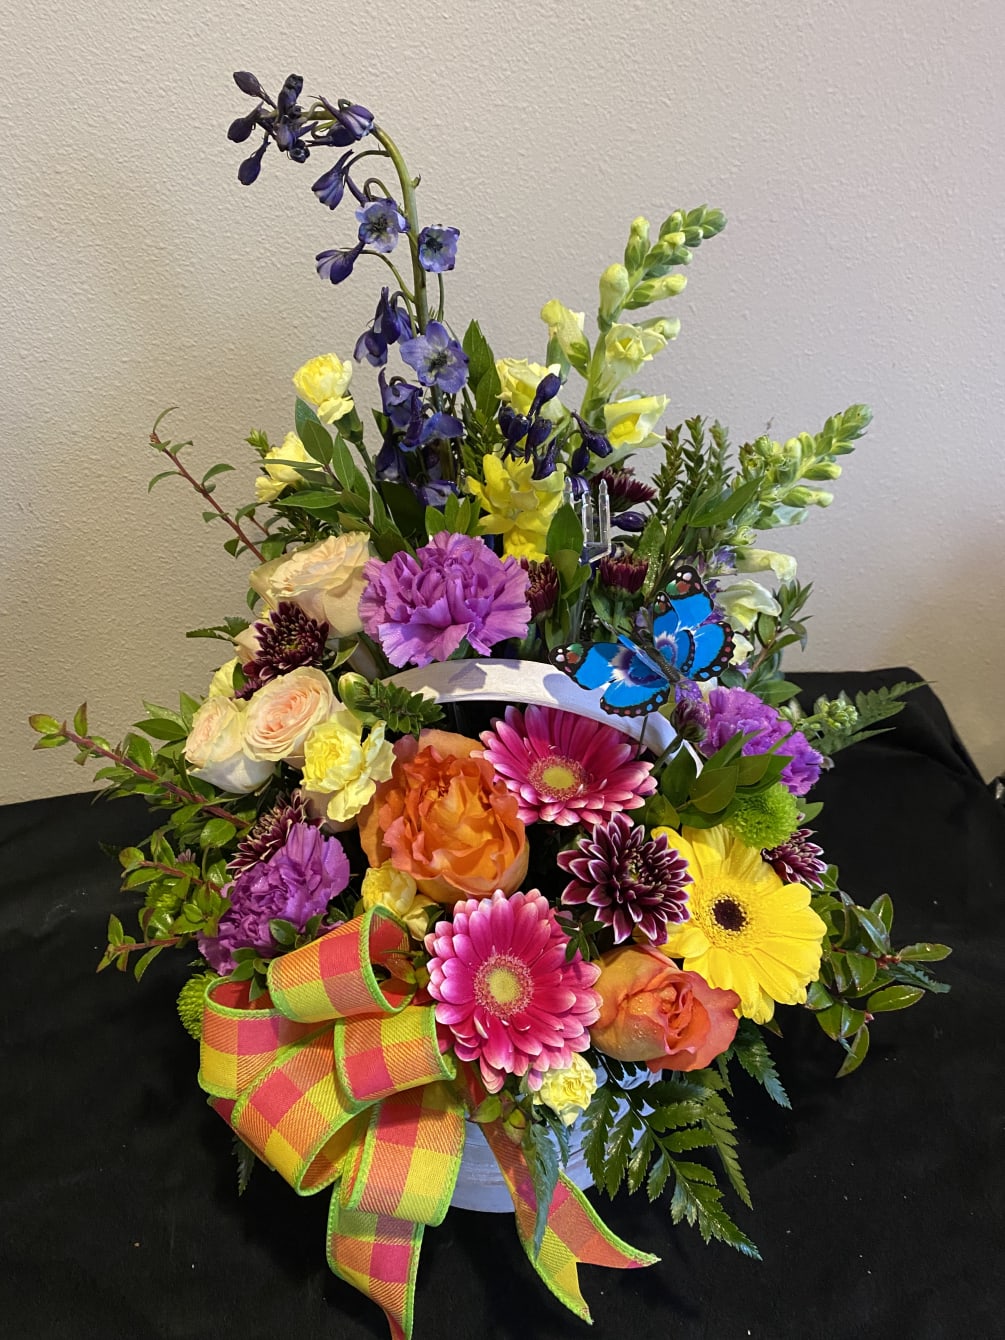 This bouquet has all the colors of the rainbow that should brighten